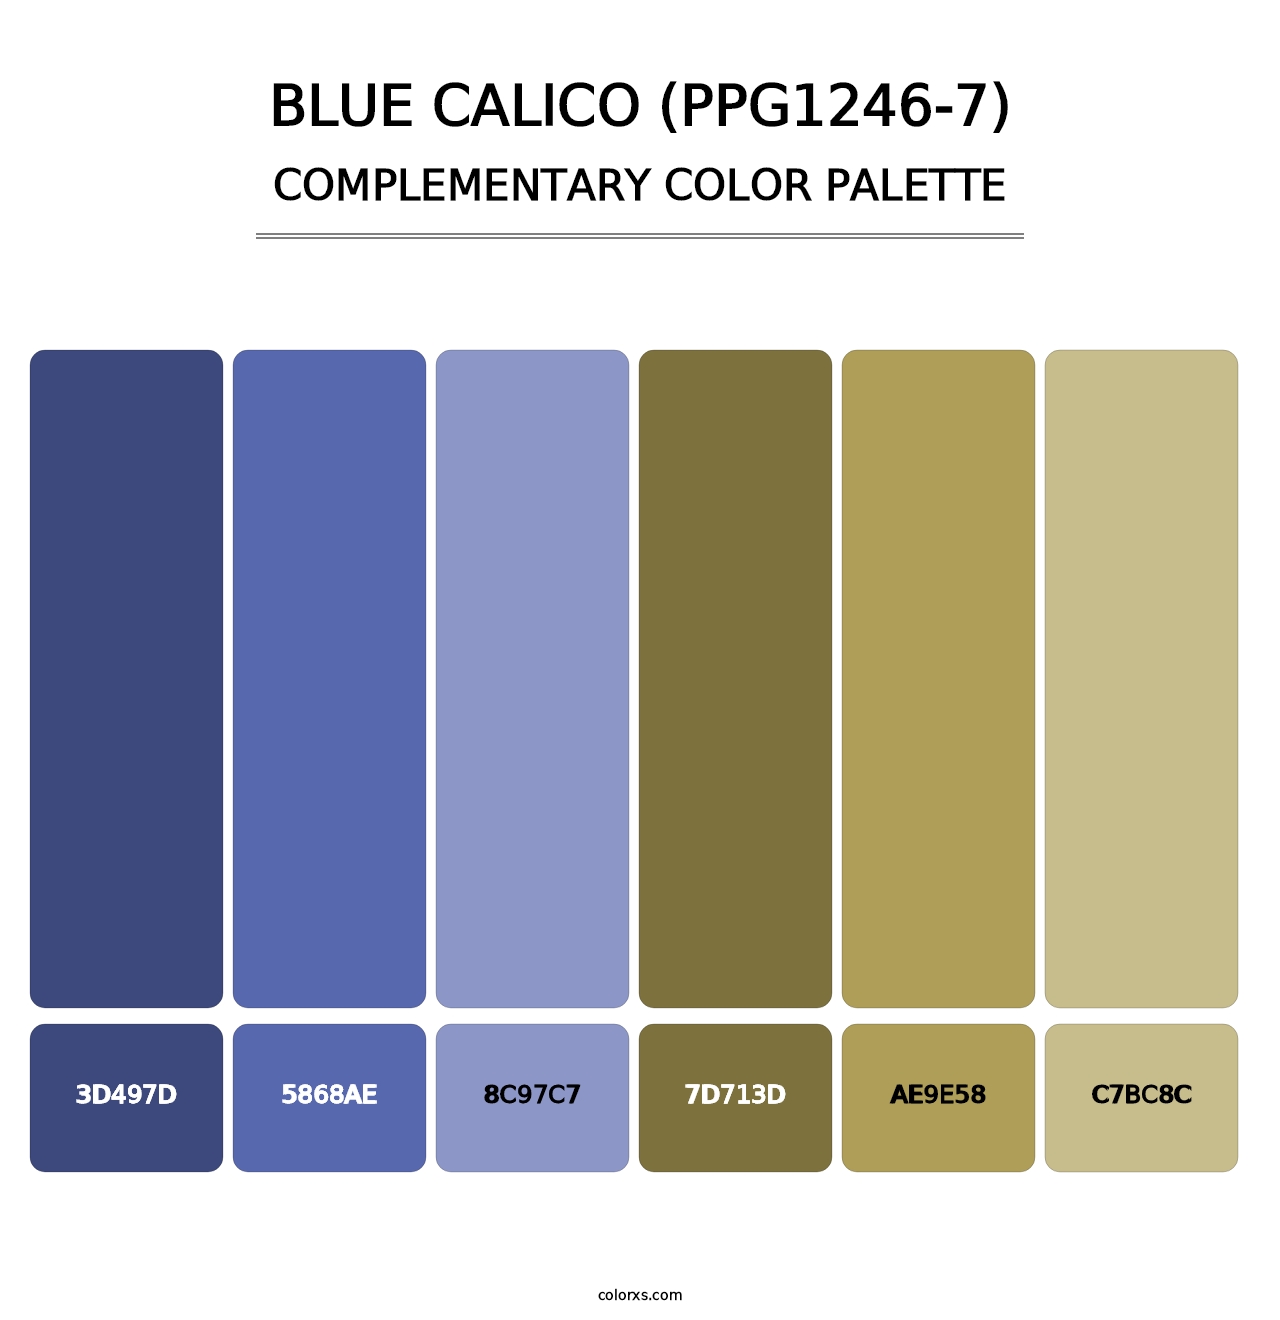 Blue Calico (PPG1246-7) - Complementary Color Palette